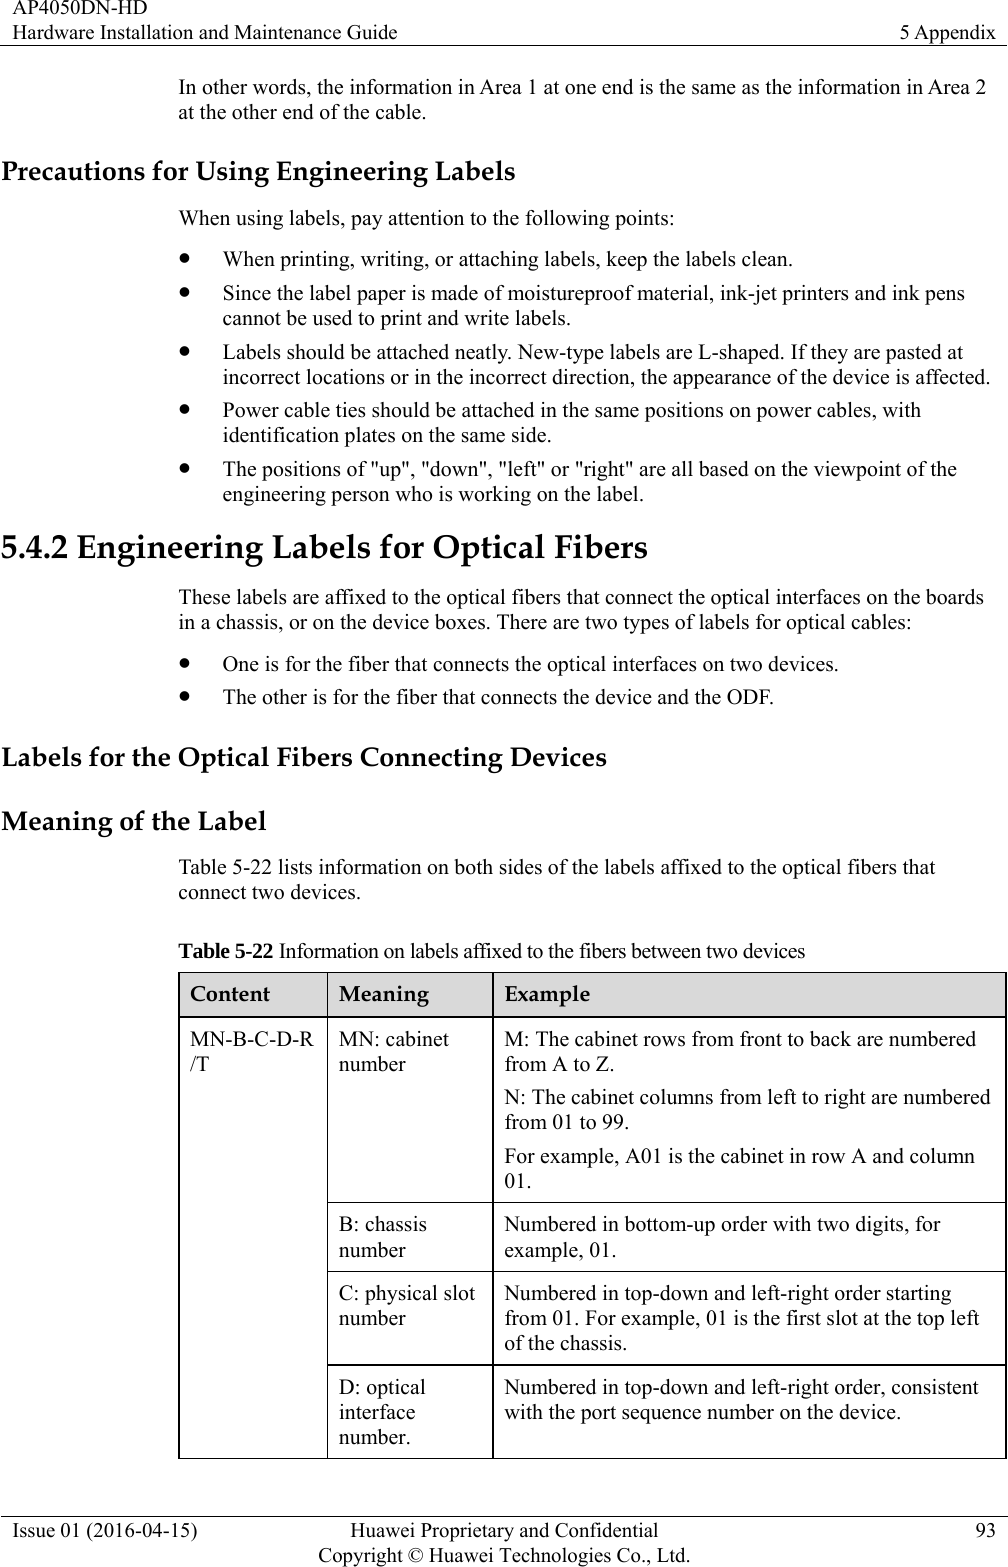 AP4050DN-HD Hardware Installation and Maintenance Guide  5 Appendix Issue 01 (2016-04-15)  Huawei Proprietary and Confidential         Copyright © Huawei Technologies Co., Ltd.93 In other words, the information in Area 1 at one end is the same as the information in Area 2 at the other end of the cable. Precautions for Using Engineering Labels When using labels, pay attention to the following points:  When printing, writing, or attaching labels, keep the labels clean.  Since the label paper is made of moistureproof material, ink-jet printers and ink pens cannot be used to print and write labels.  Labels should be attached neatly. New-type labels are L-shaped. If they are pasted at incorrect locations or in the incorrect direction, the appearance of the device is affected.  Power cable ties should be attached in the same positions on power cables, with identification plates on the same side.  The positions of &quot;up&quot;, &quot;down&quot;, &quot;left&quot; or &quot;right&quot; are all based on the viewpoint of the engineering person who is working on the label. 5.4.2 Engineering Labels for Optical Fibers These labels are affixed to the optical fibers that connect the optical interfaces on the boards in a chassis, or on the device boxes. There are two types of labels for optical cables:  One is for the fiber that connects the optical interfaces on two devices.  The other is for the fiber that connects the device and the ODF. Labels for the Optical Fibers Connecting Devices Meaning of the Label Table 5-22 lists information on both sides of the labels affixed to the optical fibers that connect two devices. Table 5-22 Information on labels affixed to the fibers between two devices Content  Meaning  Example MN-B-C-D-R/T MN: cabinet number M: The cabinet rows from front to back are numbered from A to Z. N: The cabinet columns from left to right are numbered from 01 to 99. For example, A01 is the cabinet in row A and column 01. B: chassis number Numbered in bottom-up order with two digits, for example, 01. C: physical slot number Numbered in top-down and left-right order starting from 01. For example, 01 is the first slot at the top left of the chassis. D: optical interface number. Numbered in top-down and left-right order, consistent with the port sequence number on the device. 